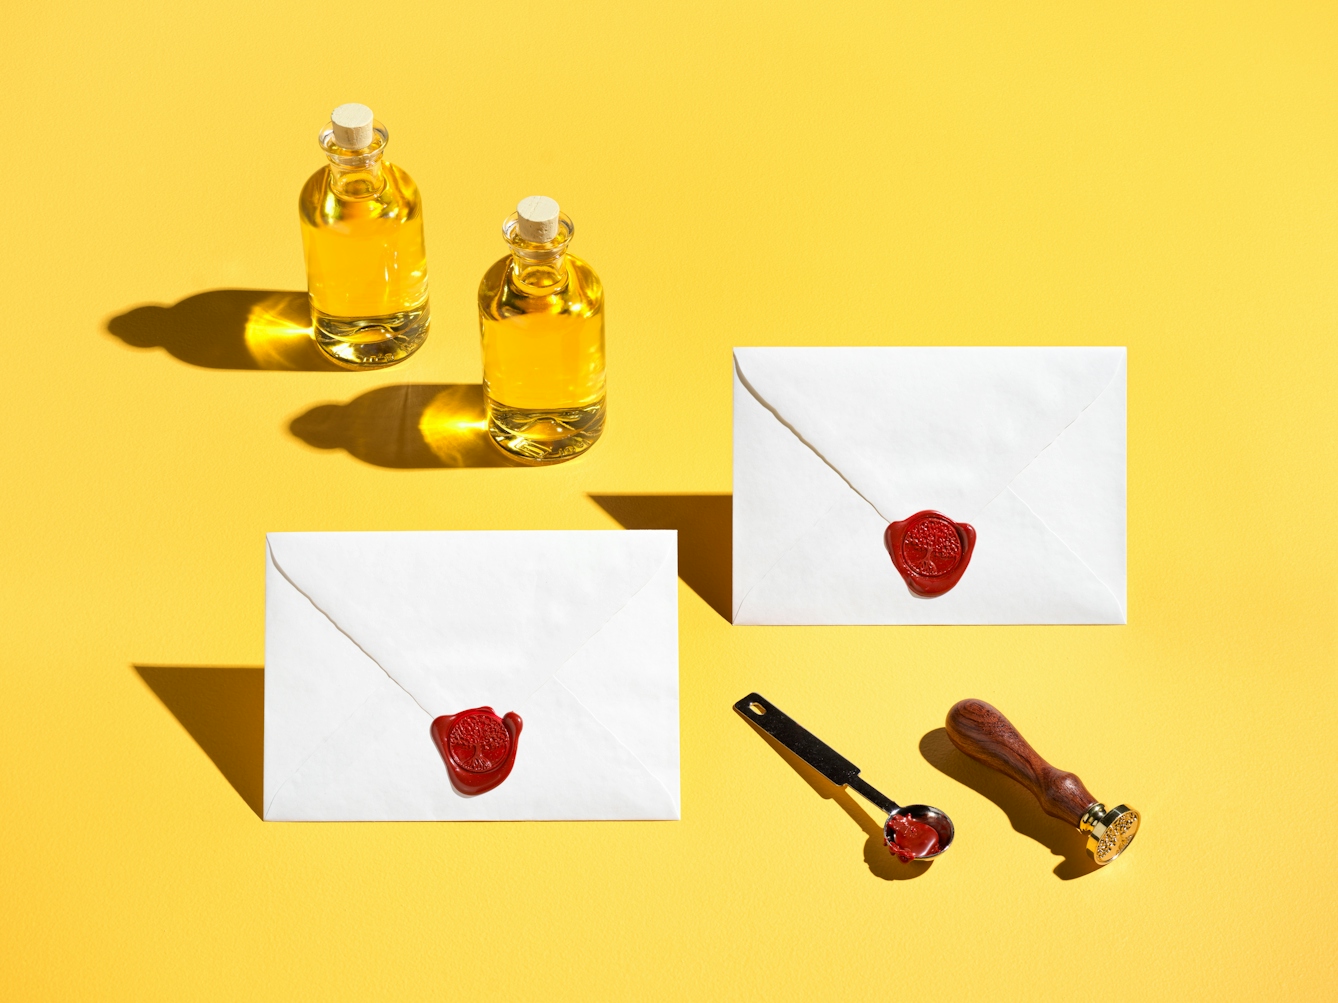 Photograph of 2 specimen bottles containing yellow liquid, 2 enveloped sealed with a red wax seal of a tree and is roots, a silver spoon and a wooden handled stamp. The whole scene has been photographed against a bright solid yellow background.